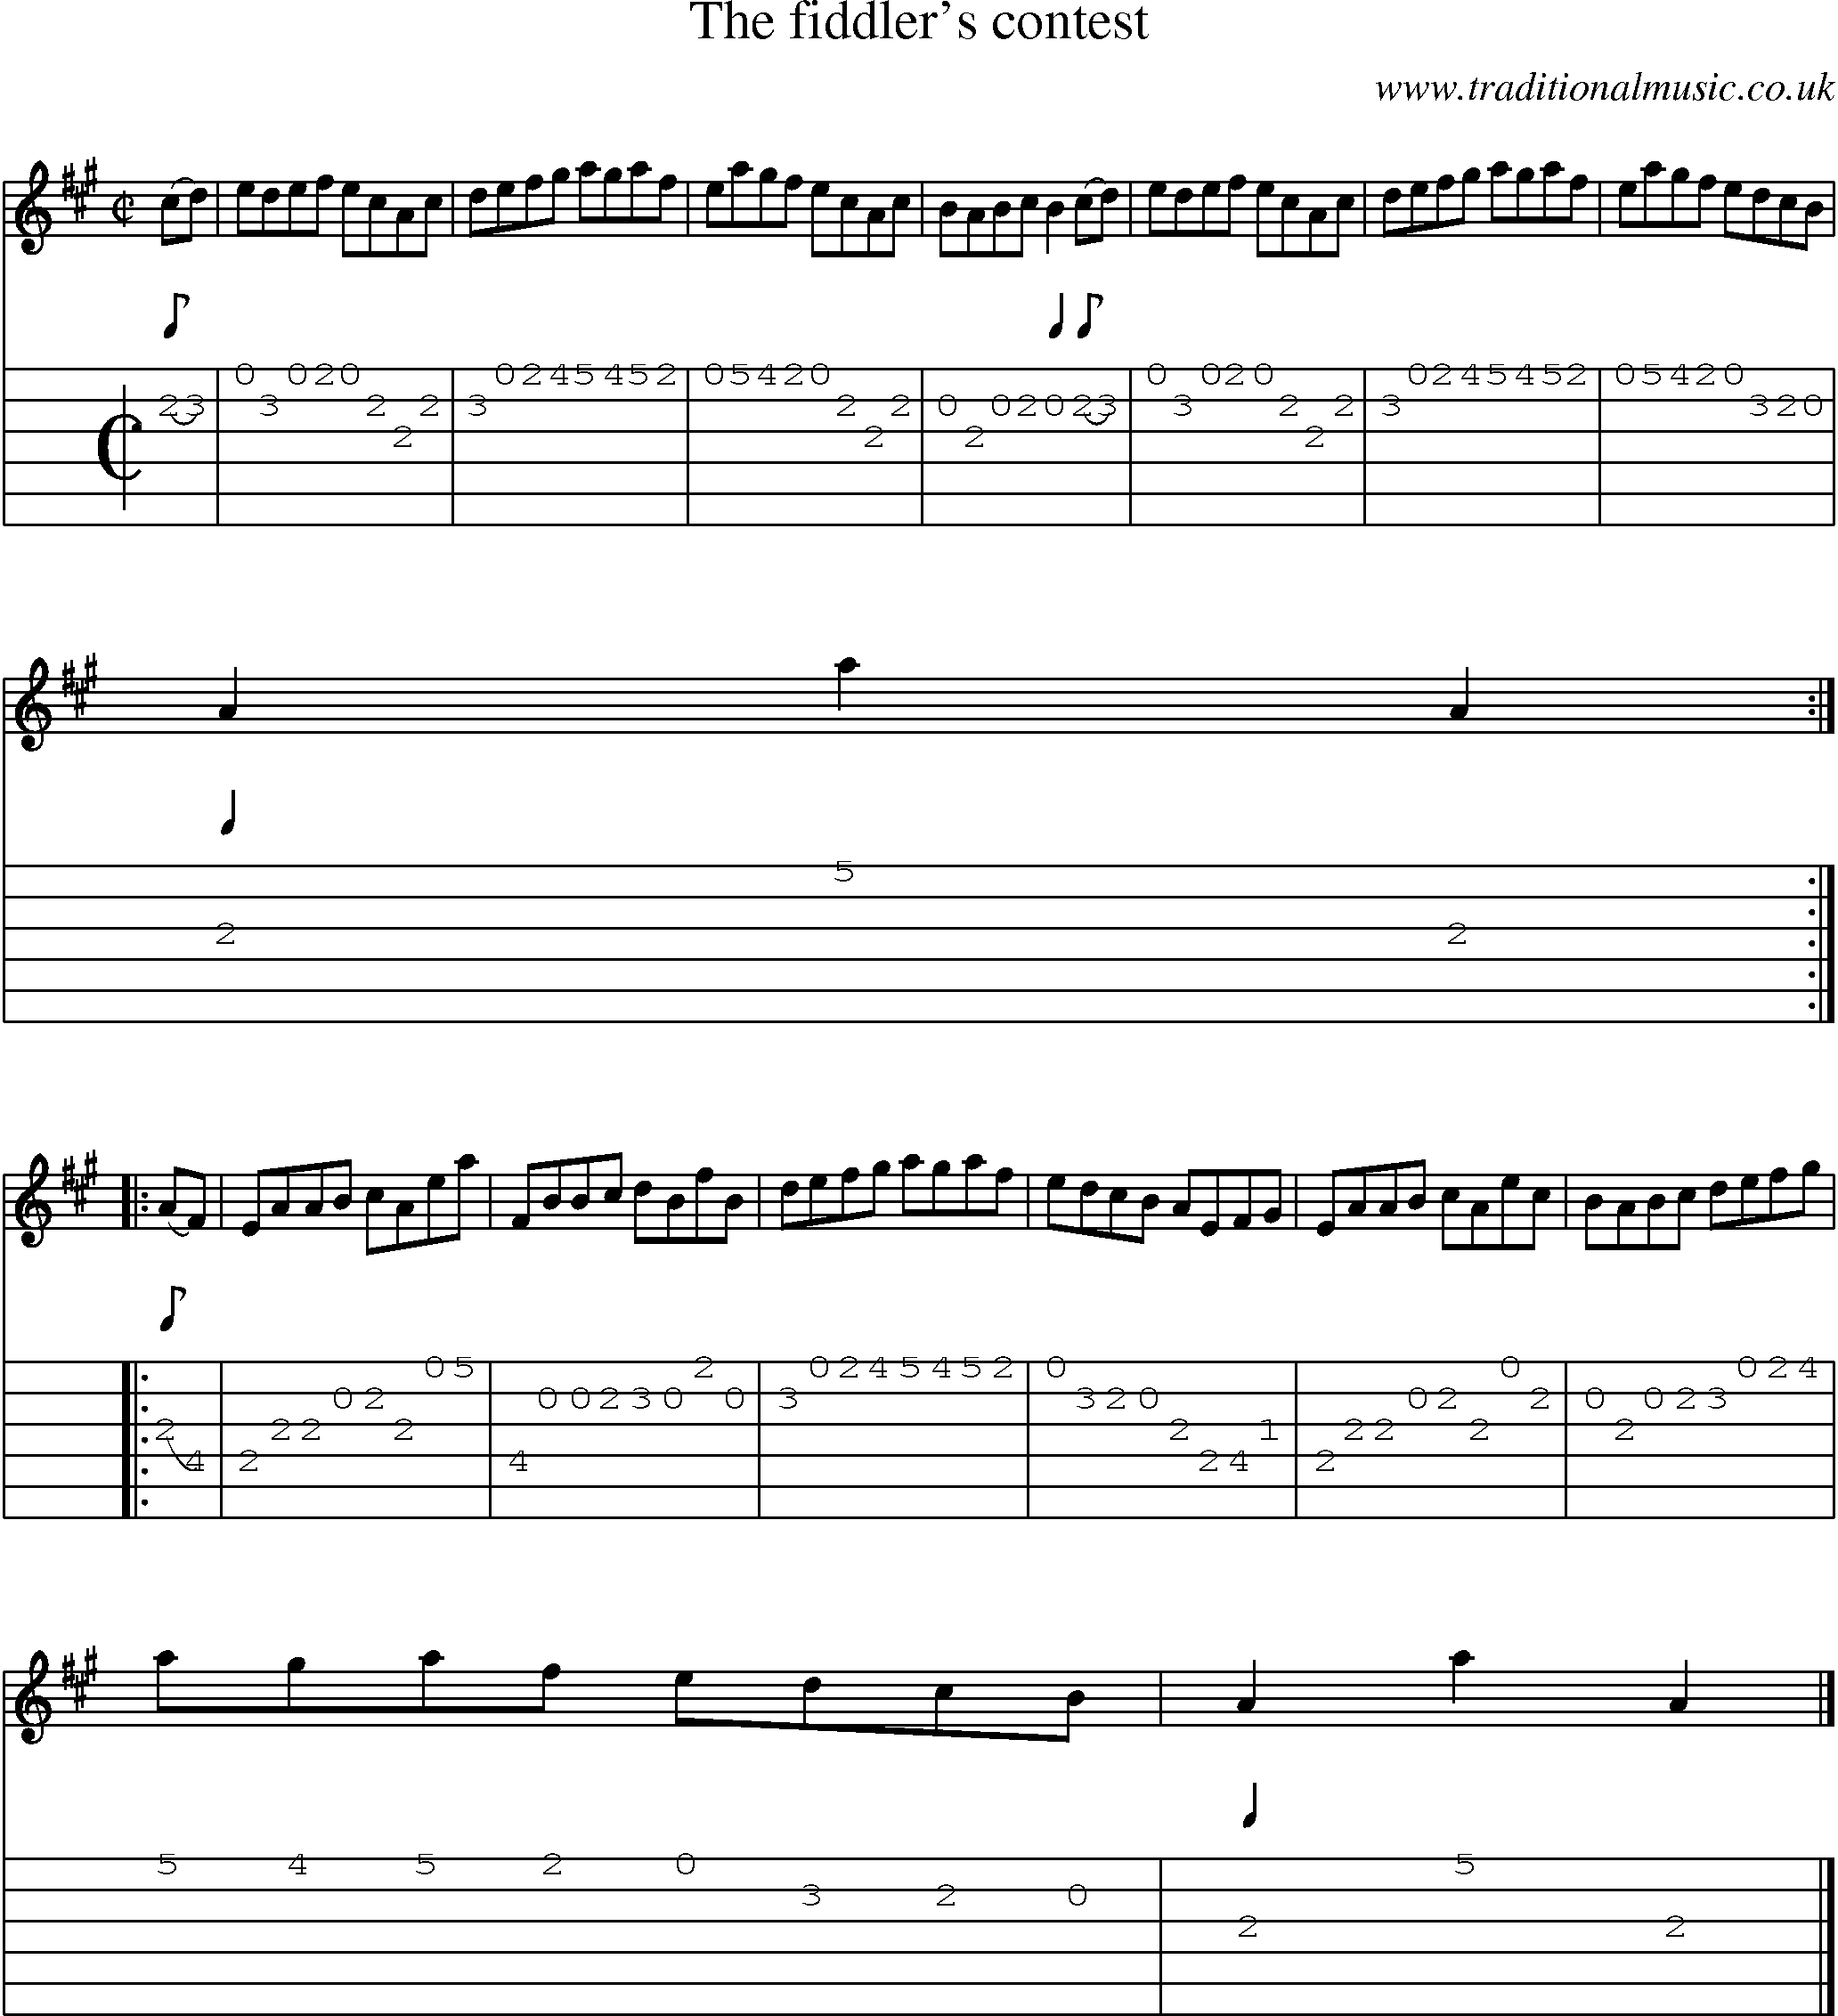 Music Score and Guitar Tabs for Fiddlers Contest